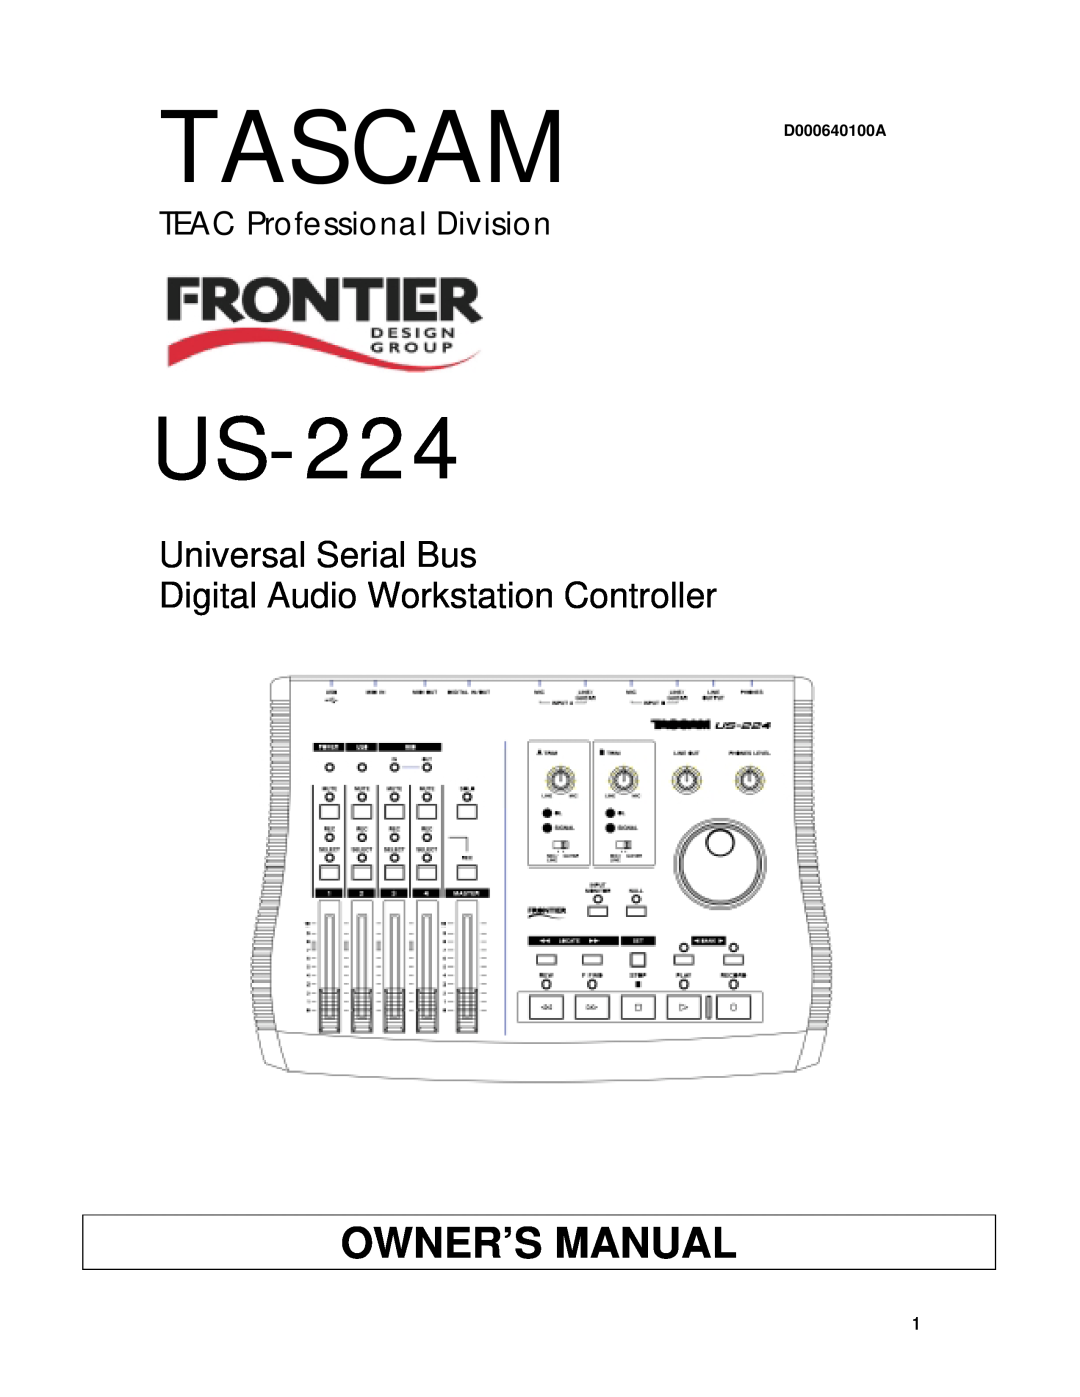 Tascam manual Setting Up, Using the US-224with Digital Performer 